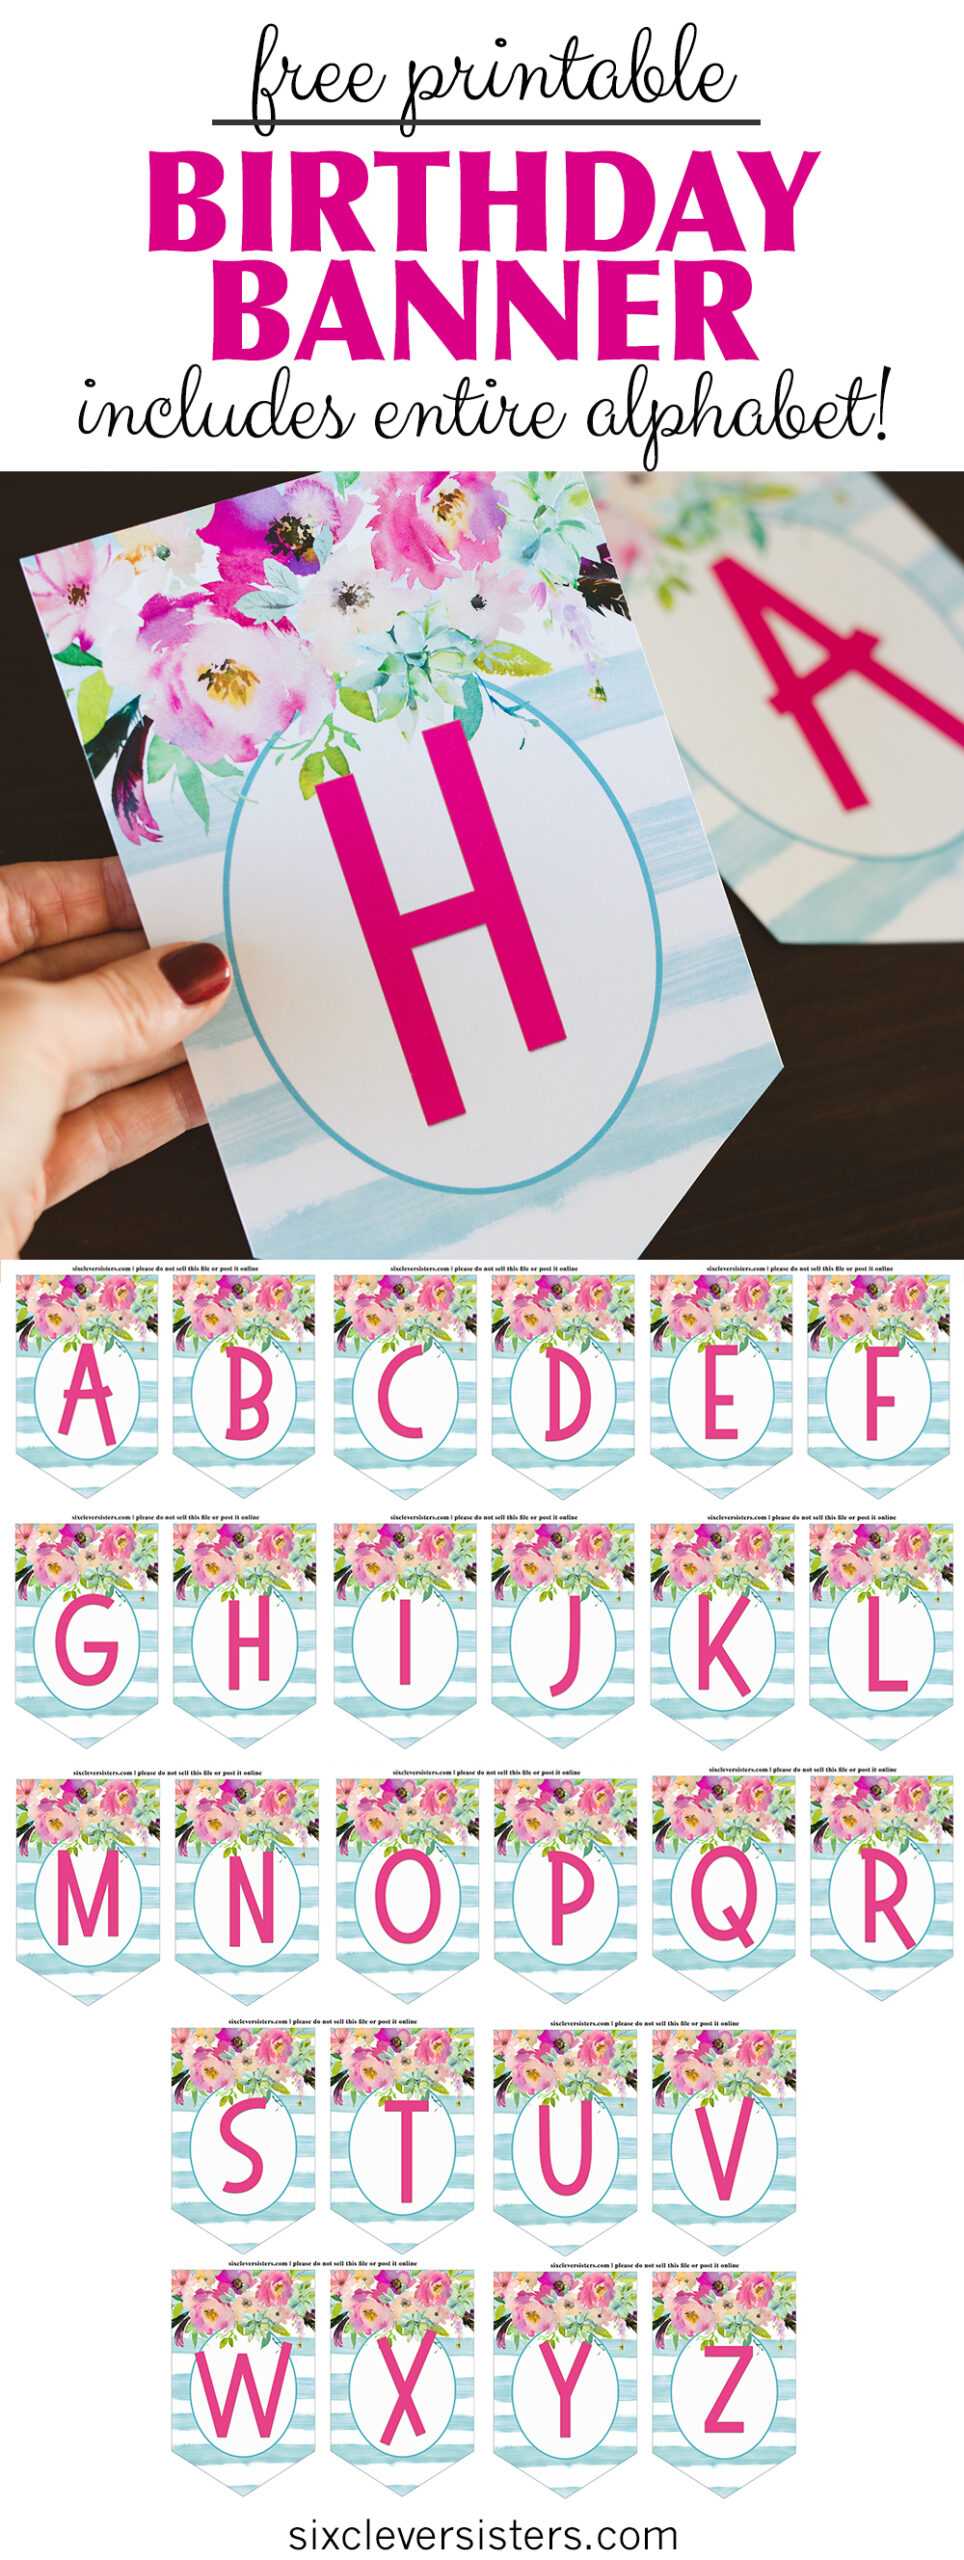 Free Printable Birthday Banner – Six Clever Sisters With Diy Birthday Banner Template